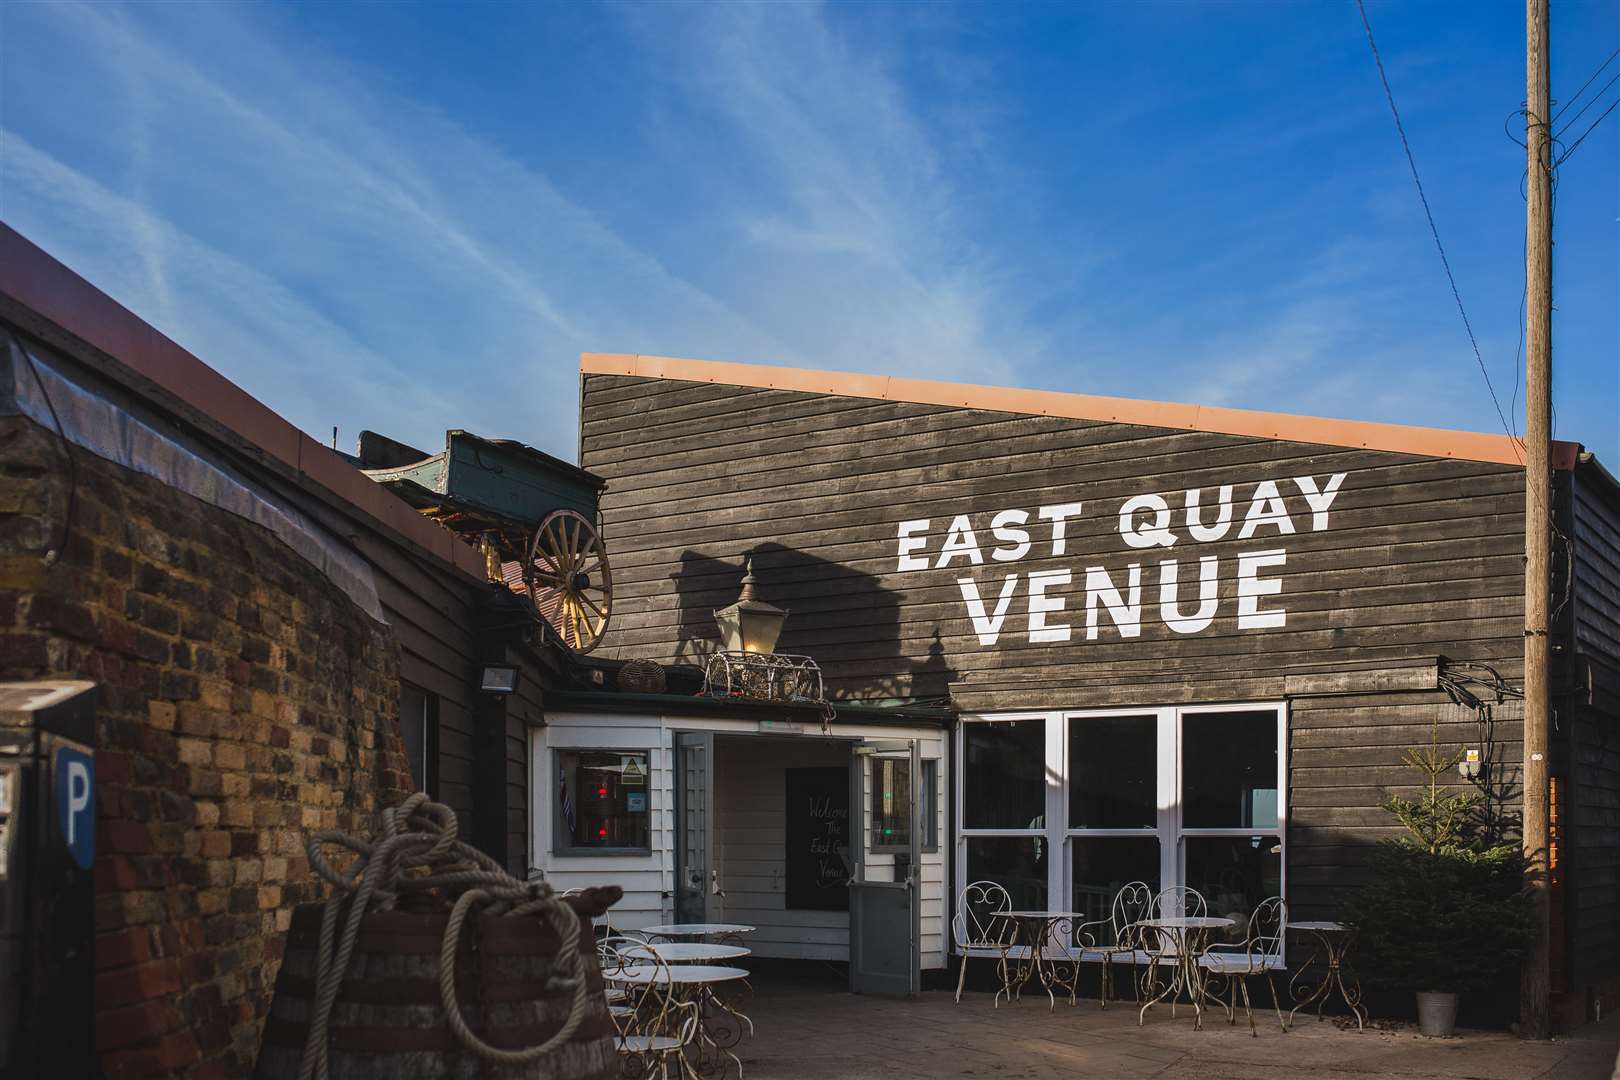 They are searching for another couple to book their slot at the East Quay Venue in Whitstable. Picture: Livvy Hukins Photography